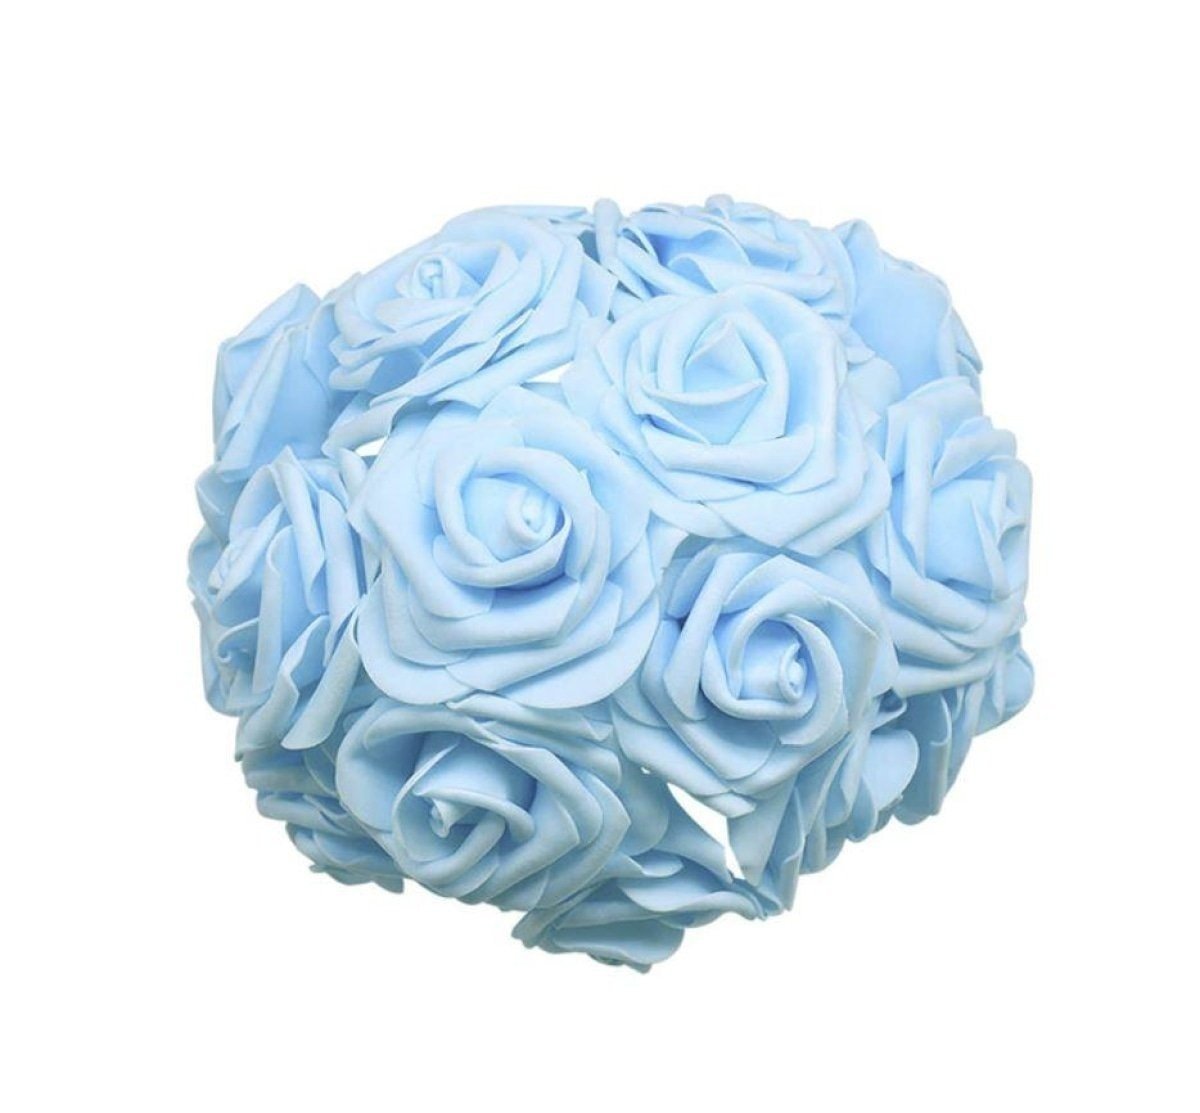 20pcs 7cm Artificial Flowers with Stems Foam Rose Fake Bride Bouquet Wedding - Light Blue 2 - - Asia Sell